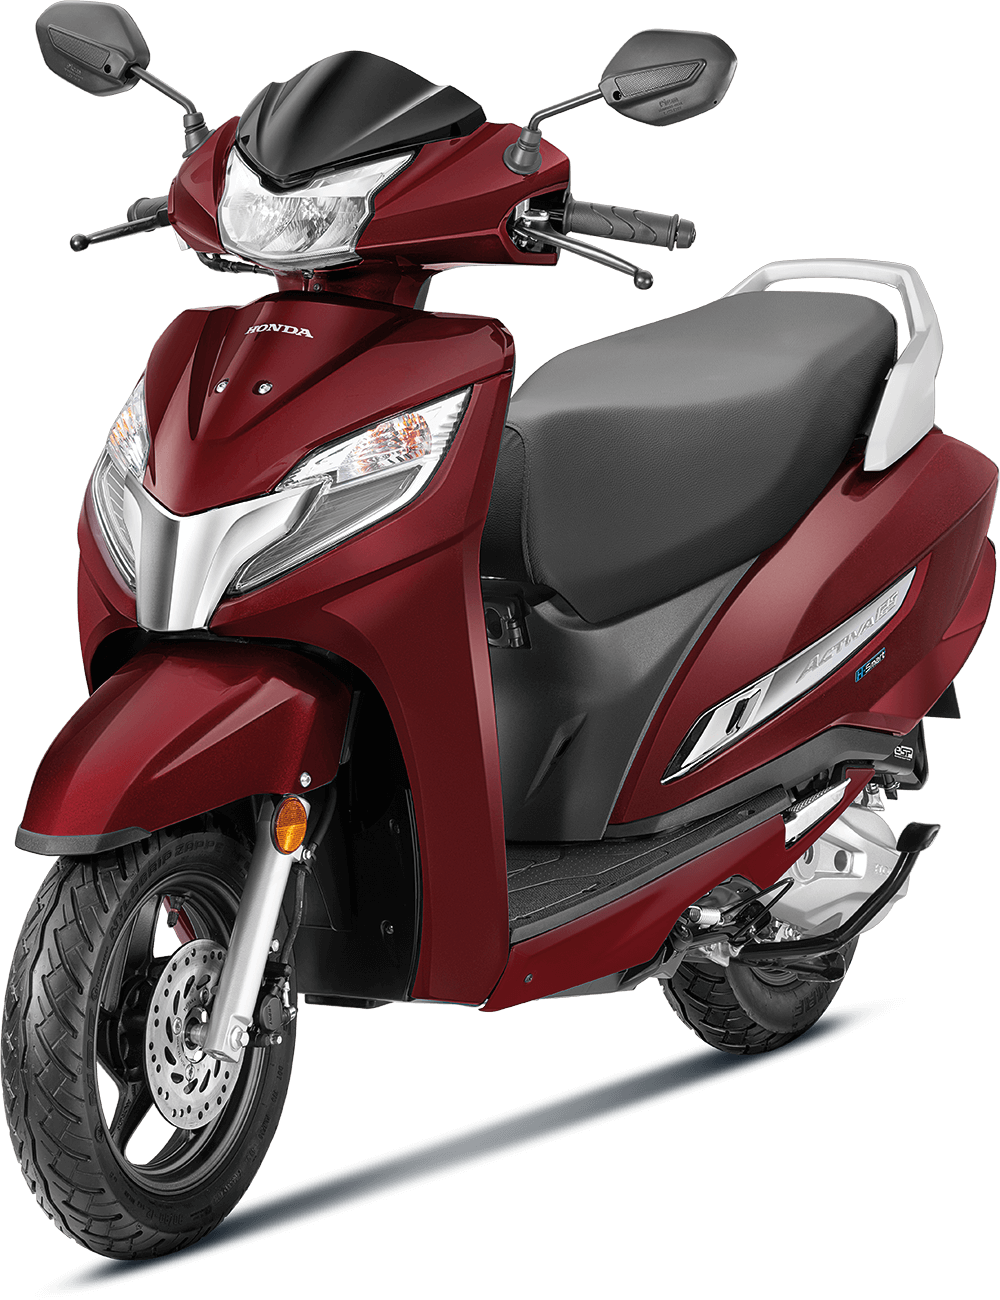 Checkout Rebel Red Metallic Honda Activa 125 OBD2 features, price and more exclusively at Rushabh Honda, Nashik. Best Two wheeler Honda Dealers for years.